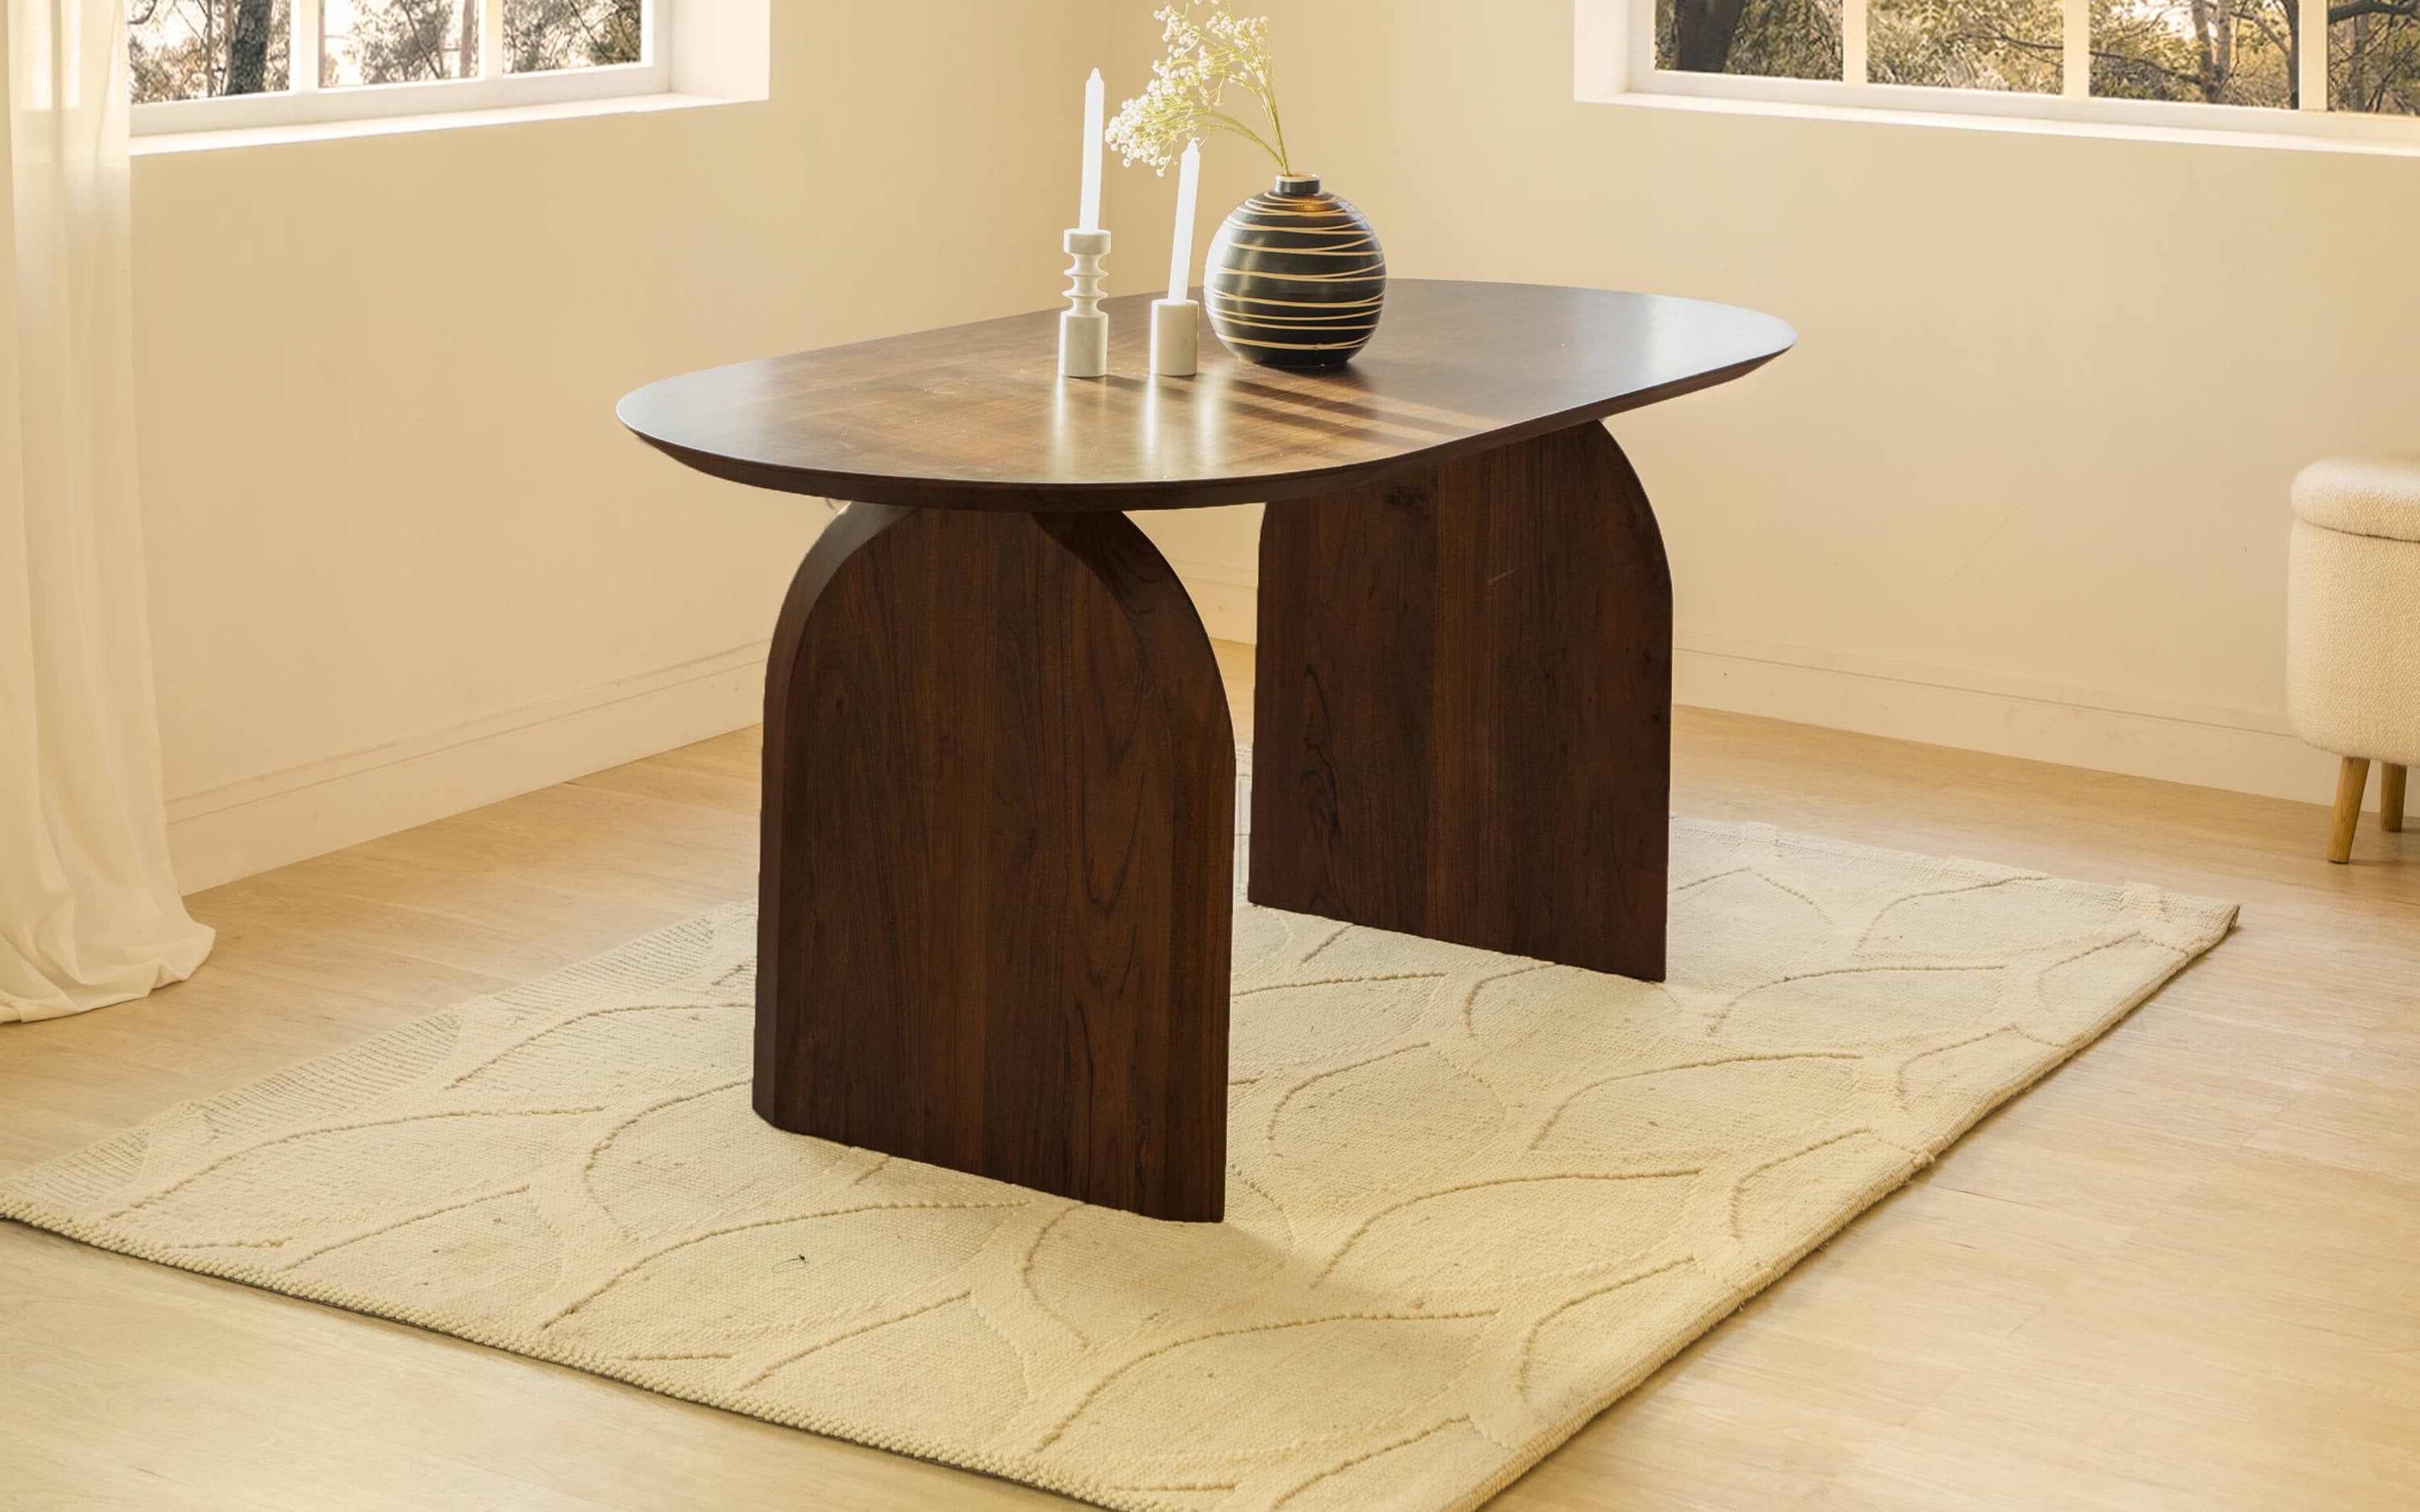 Emiko Dining Table 6 Seater